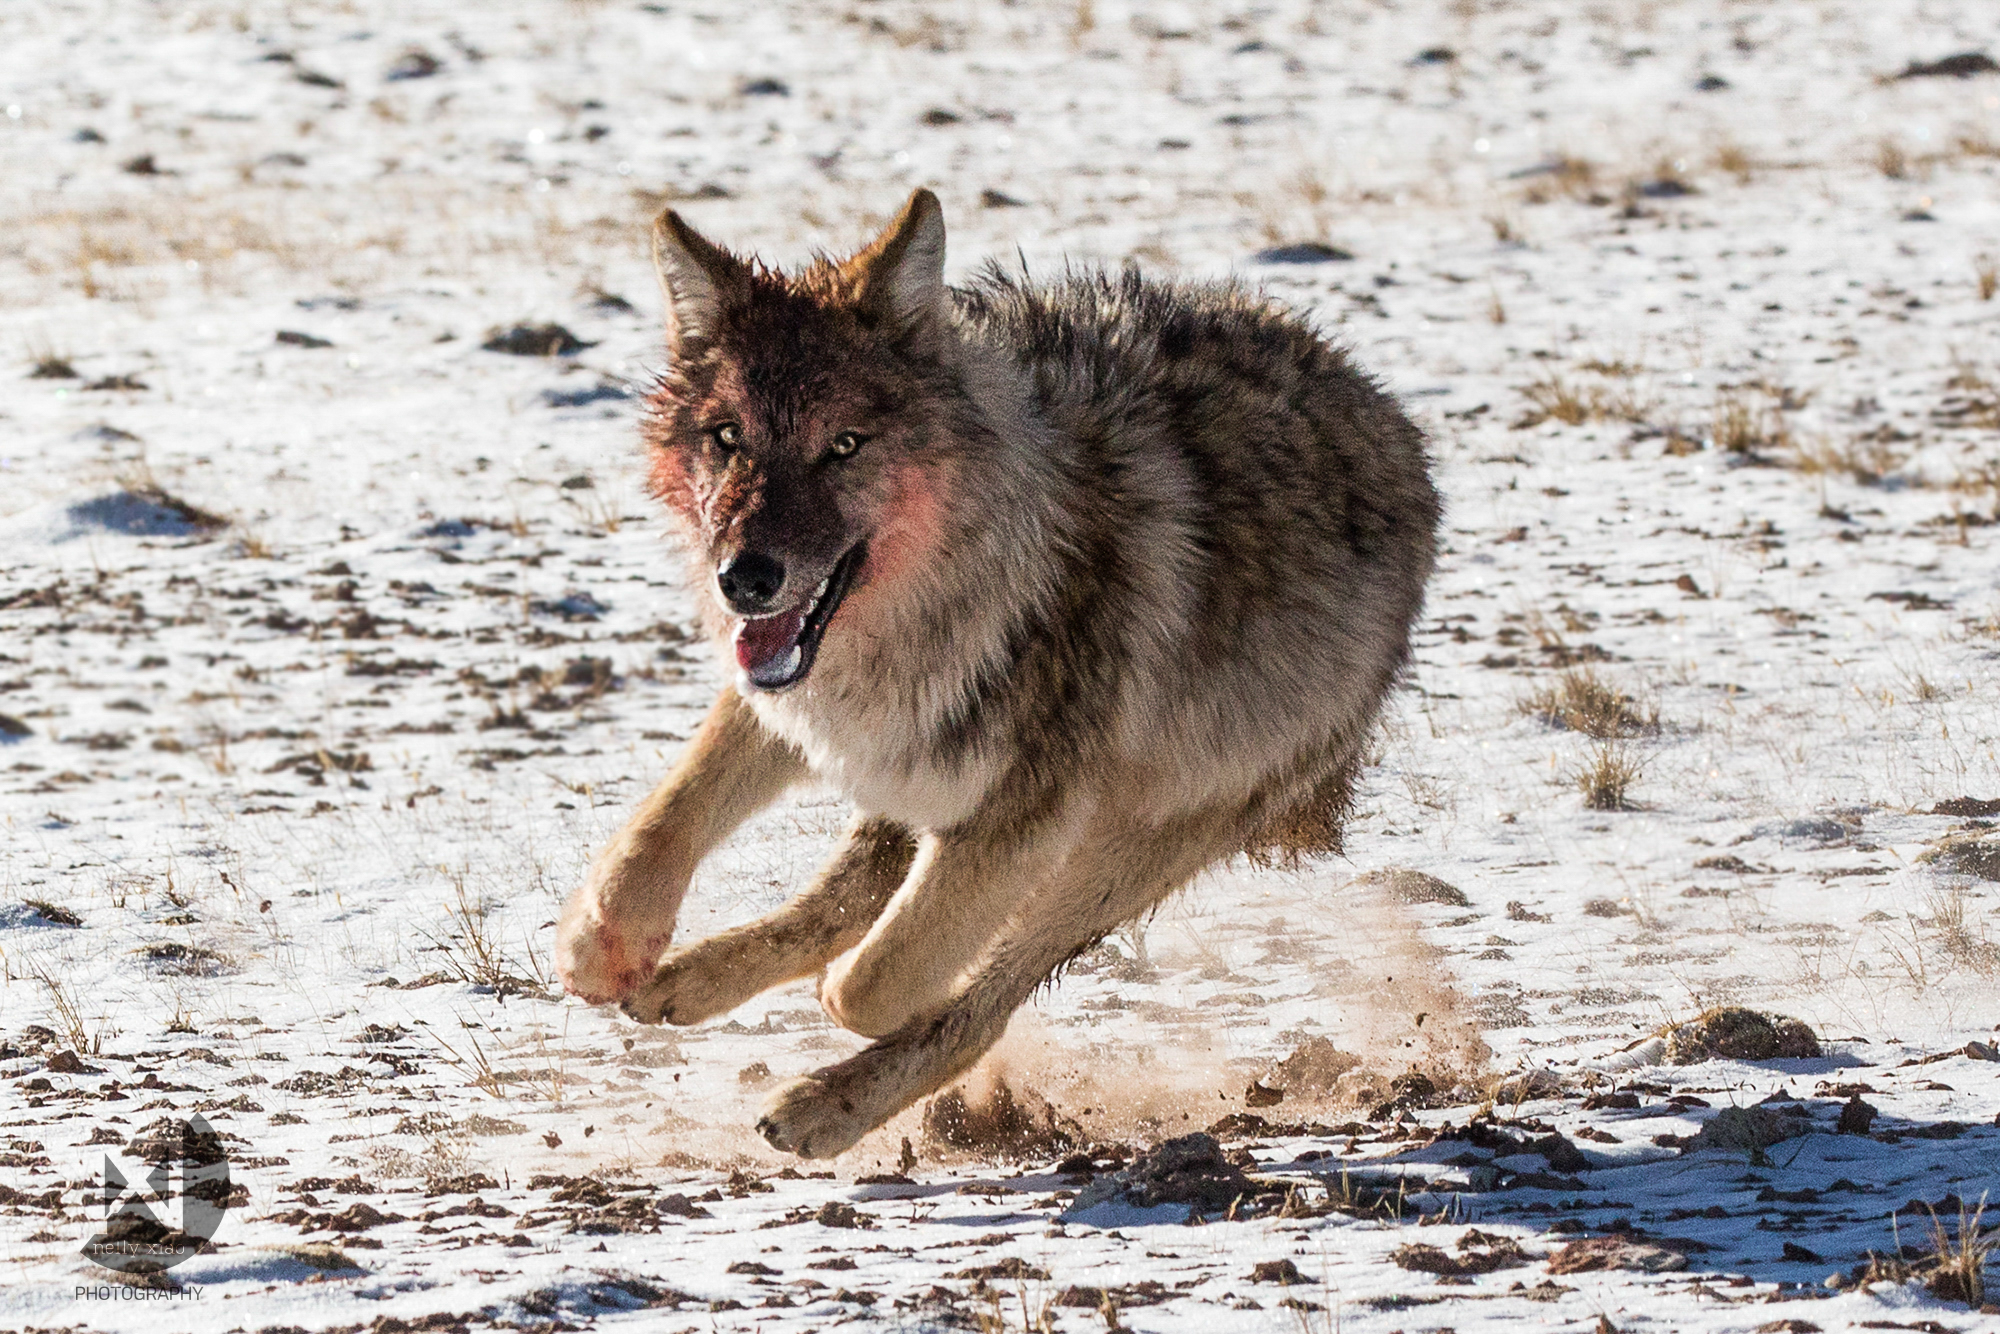   An angry Tibetan giant wolf charging at the camera   Kekexili Wildlife Conservation, December 2015 